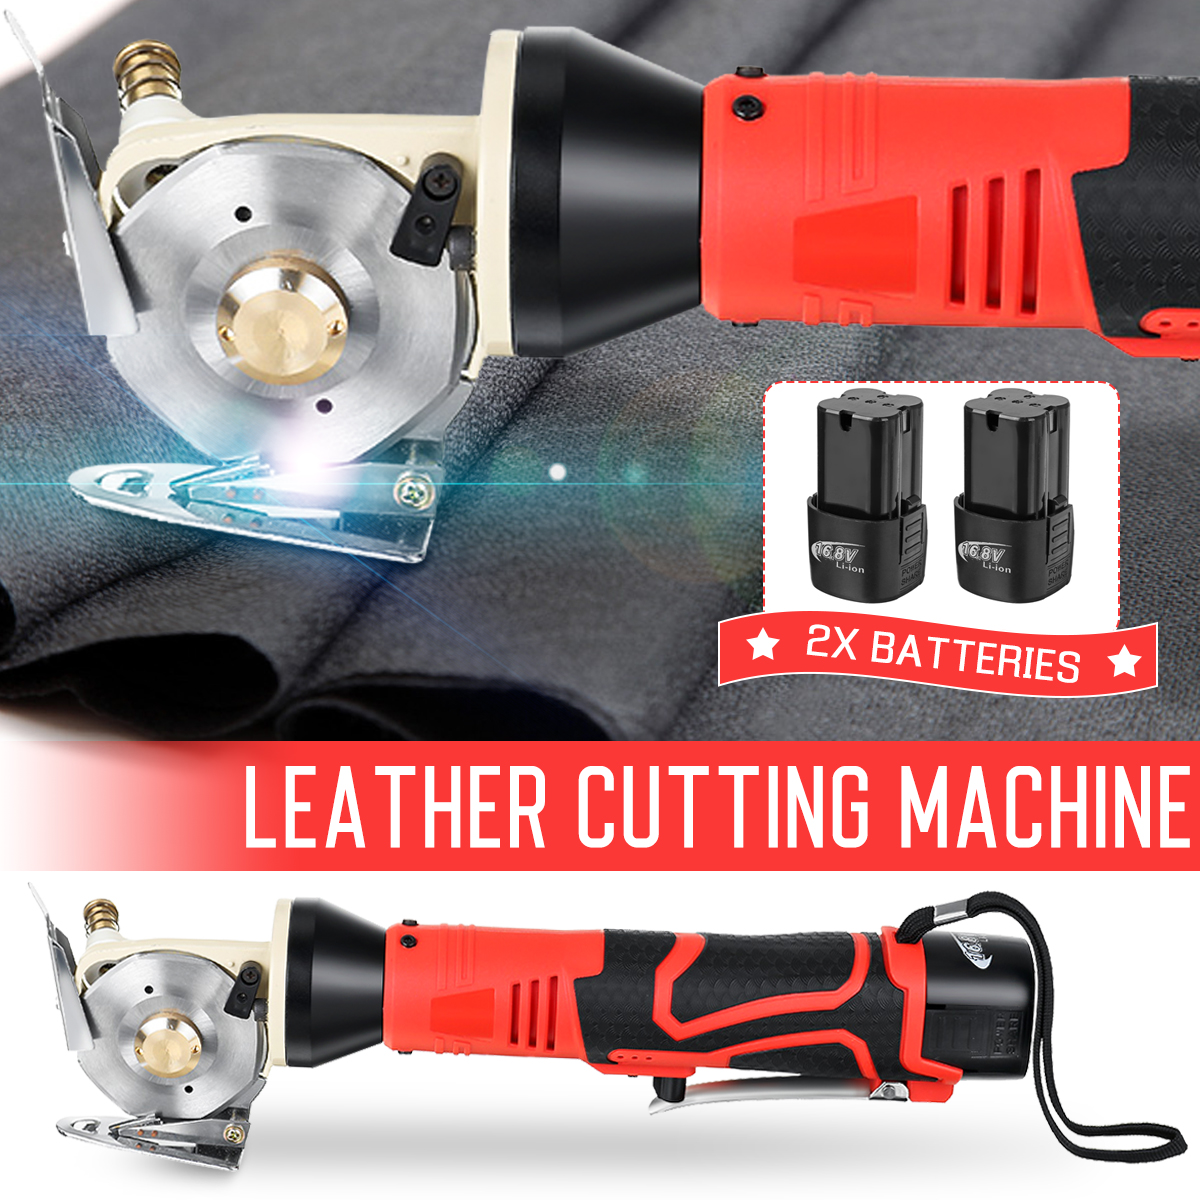 Cordless-Rechargeable-Electric-Cloth-Fabric-Cutting-Tools-Leather-Blanket-Electric-Cutter-Saws-Machi-1868912-2